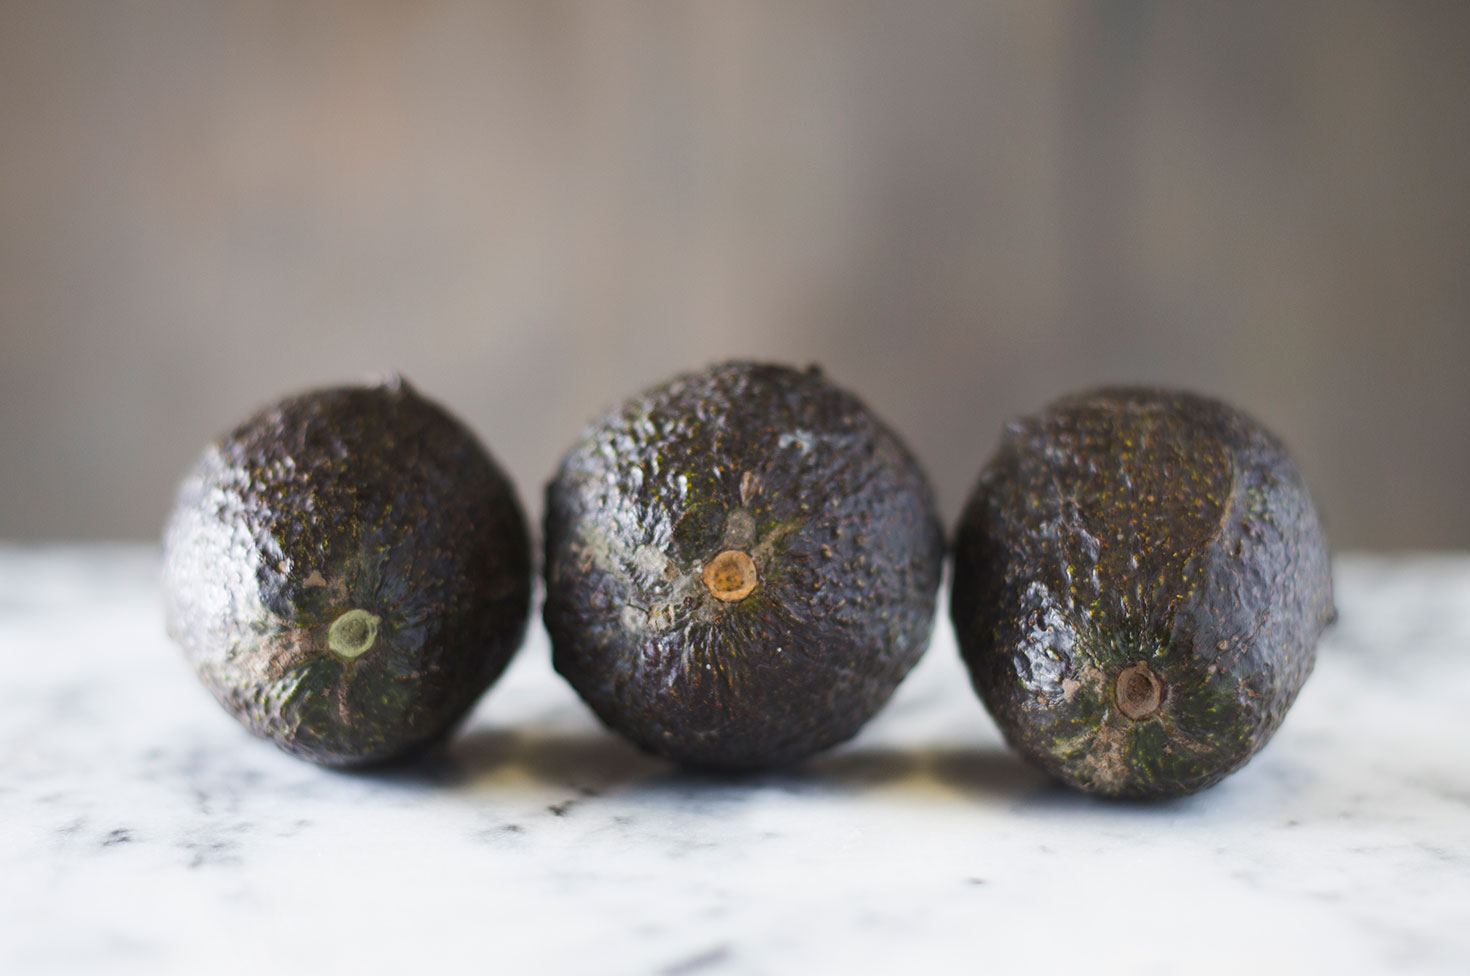 How To Easily Tell When an Avocado is Ripe - avocado